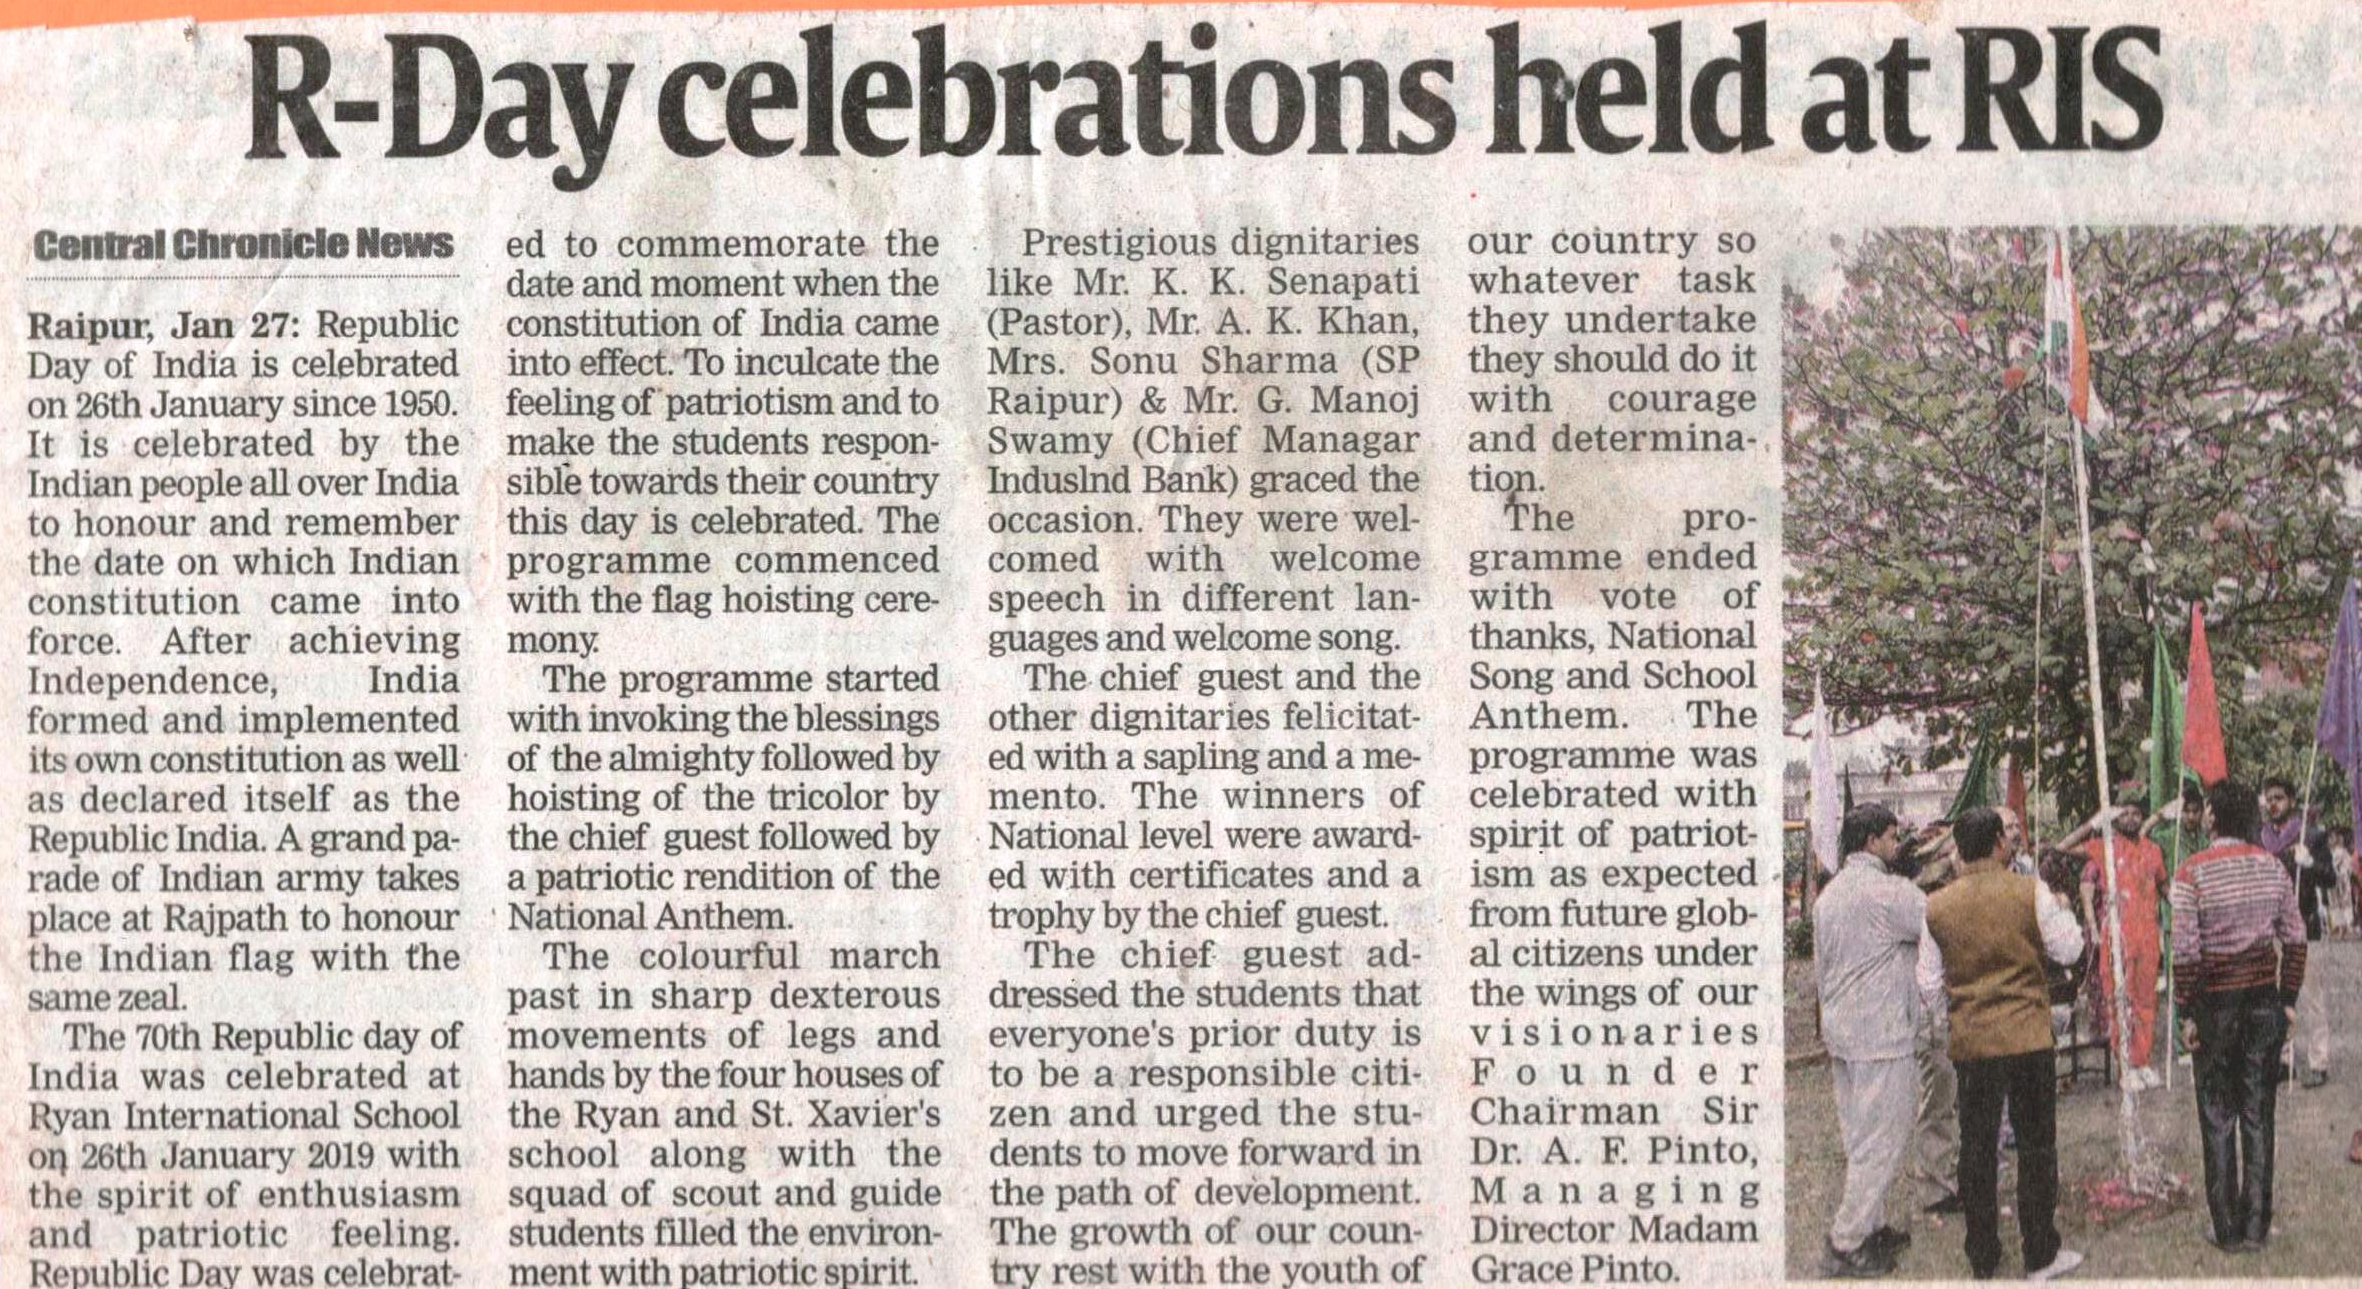 R-Day celebrations held at RIS